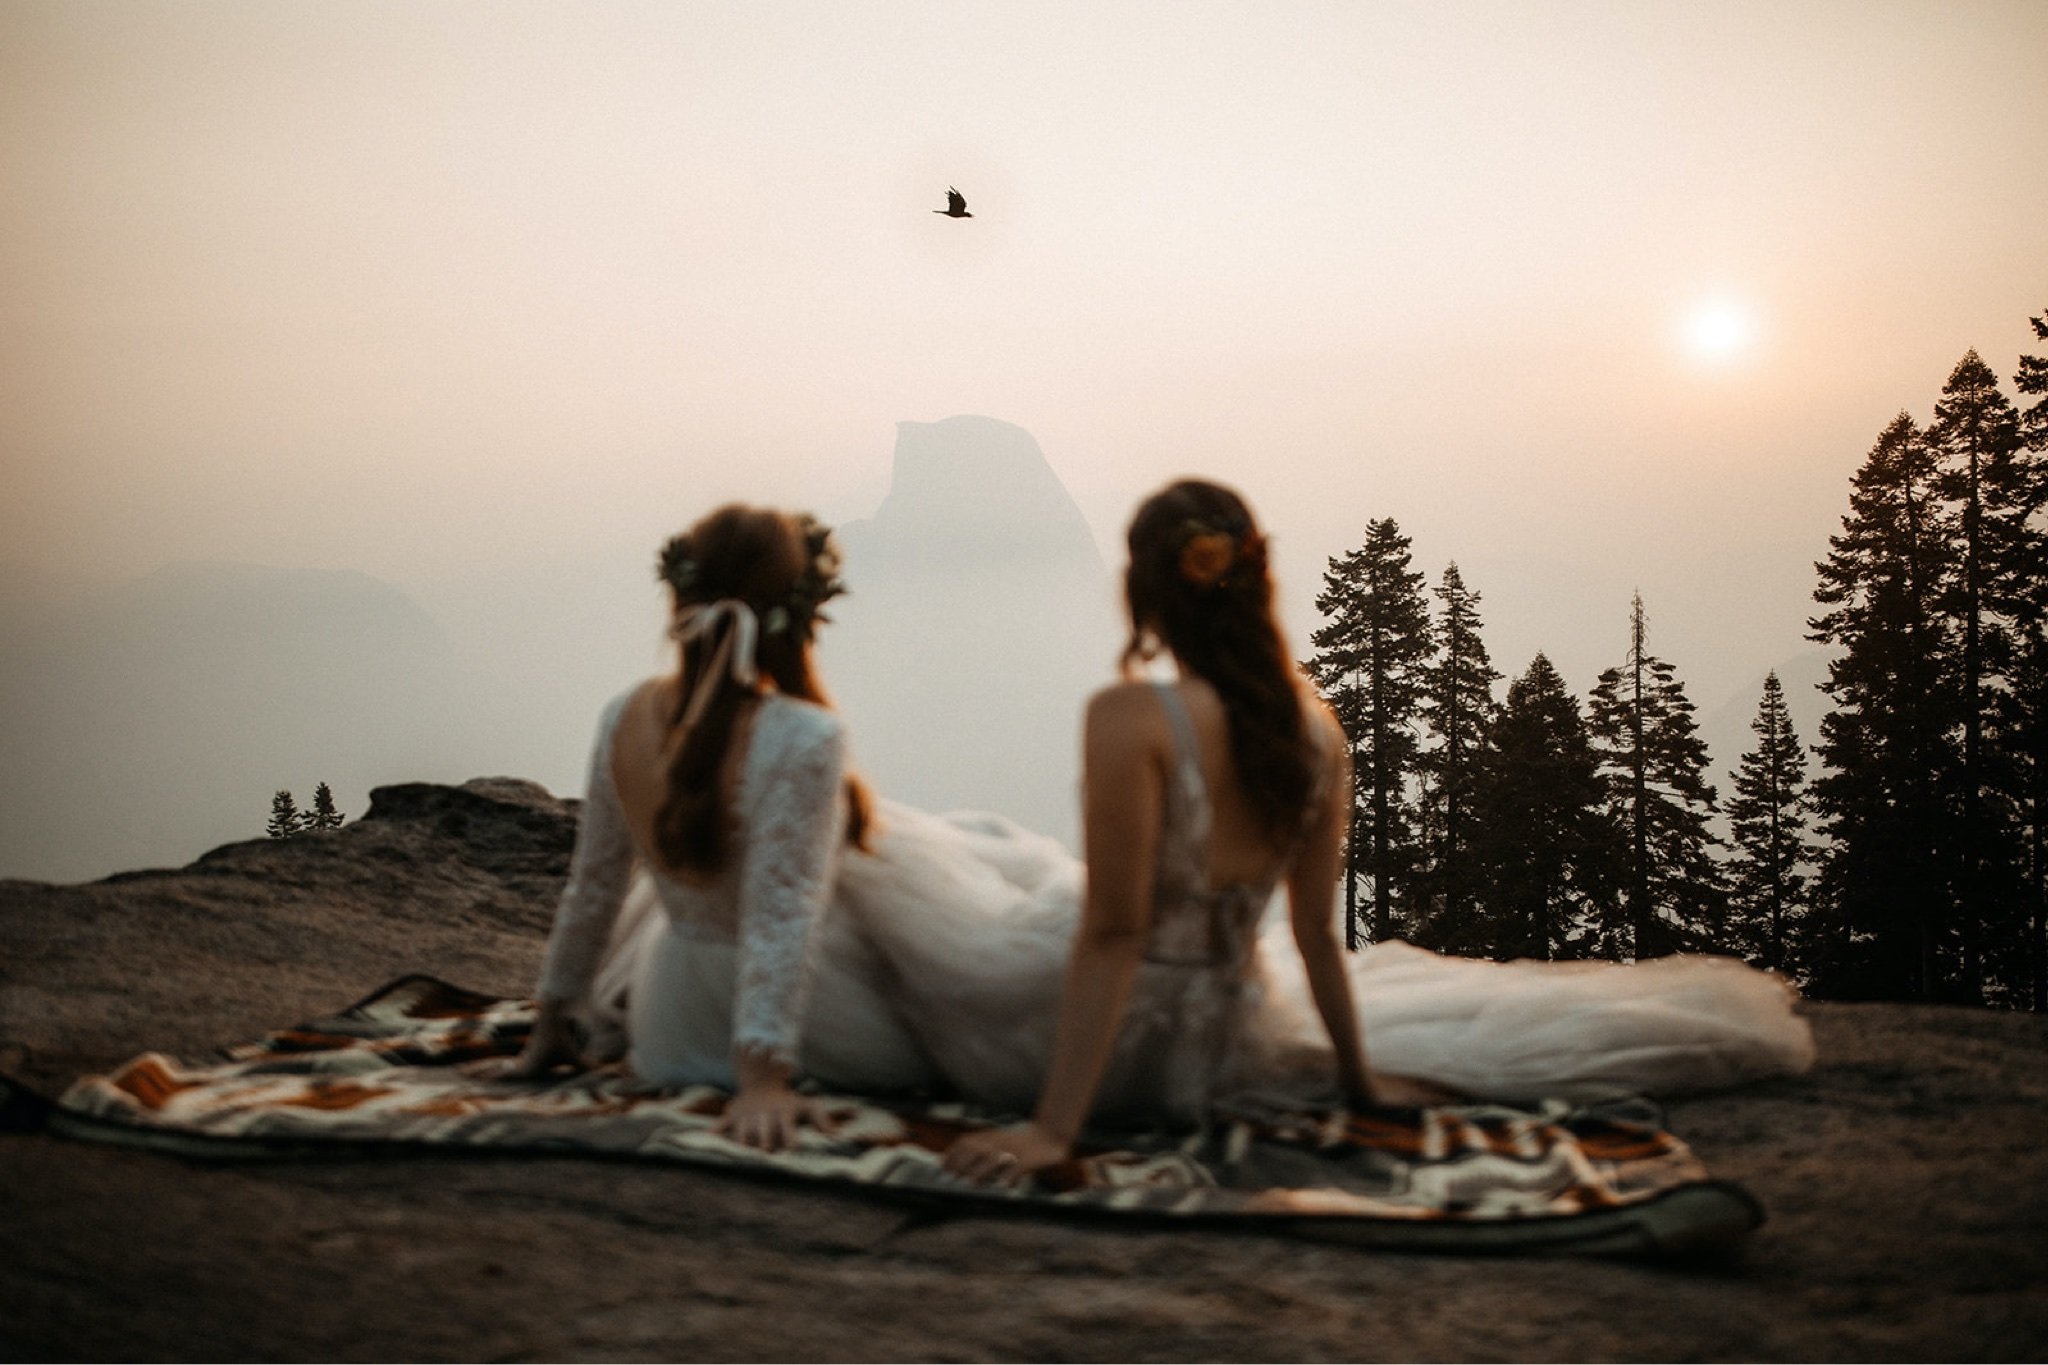 Yosemite National Park Elopement with Two Brides-Will Khoury80.jpg